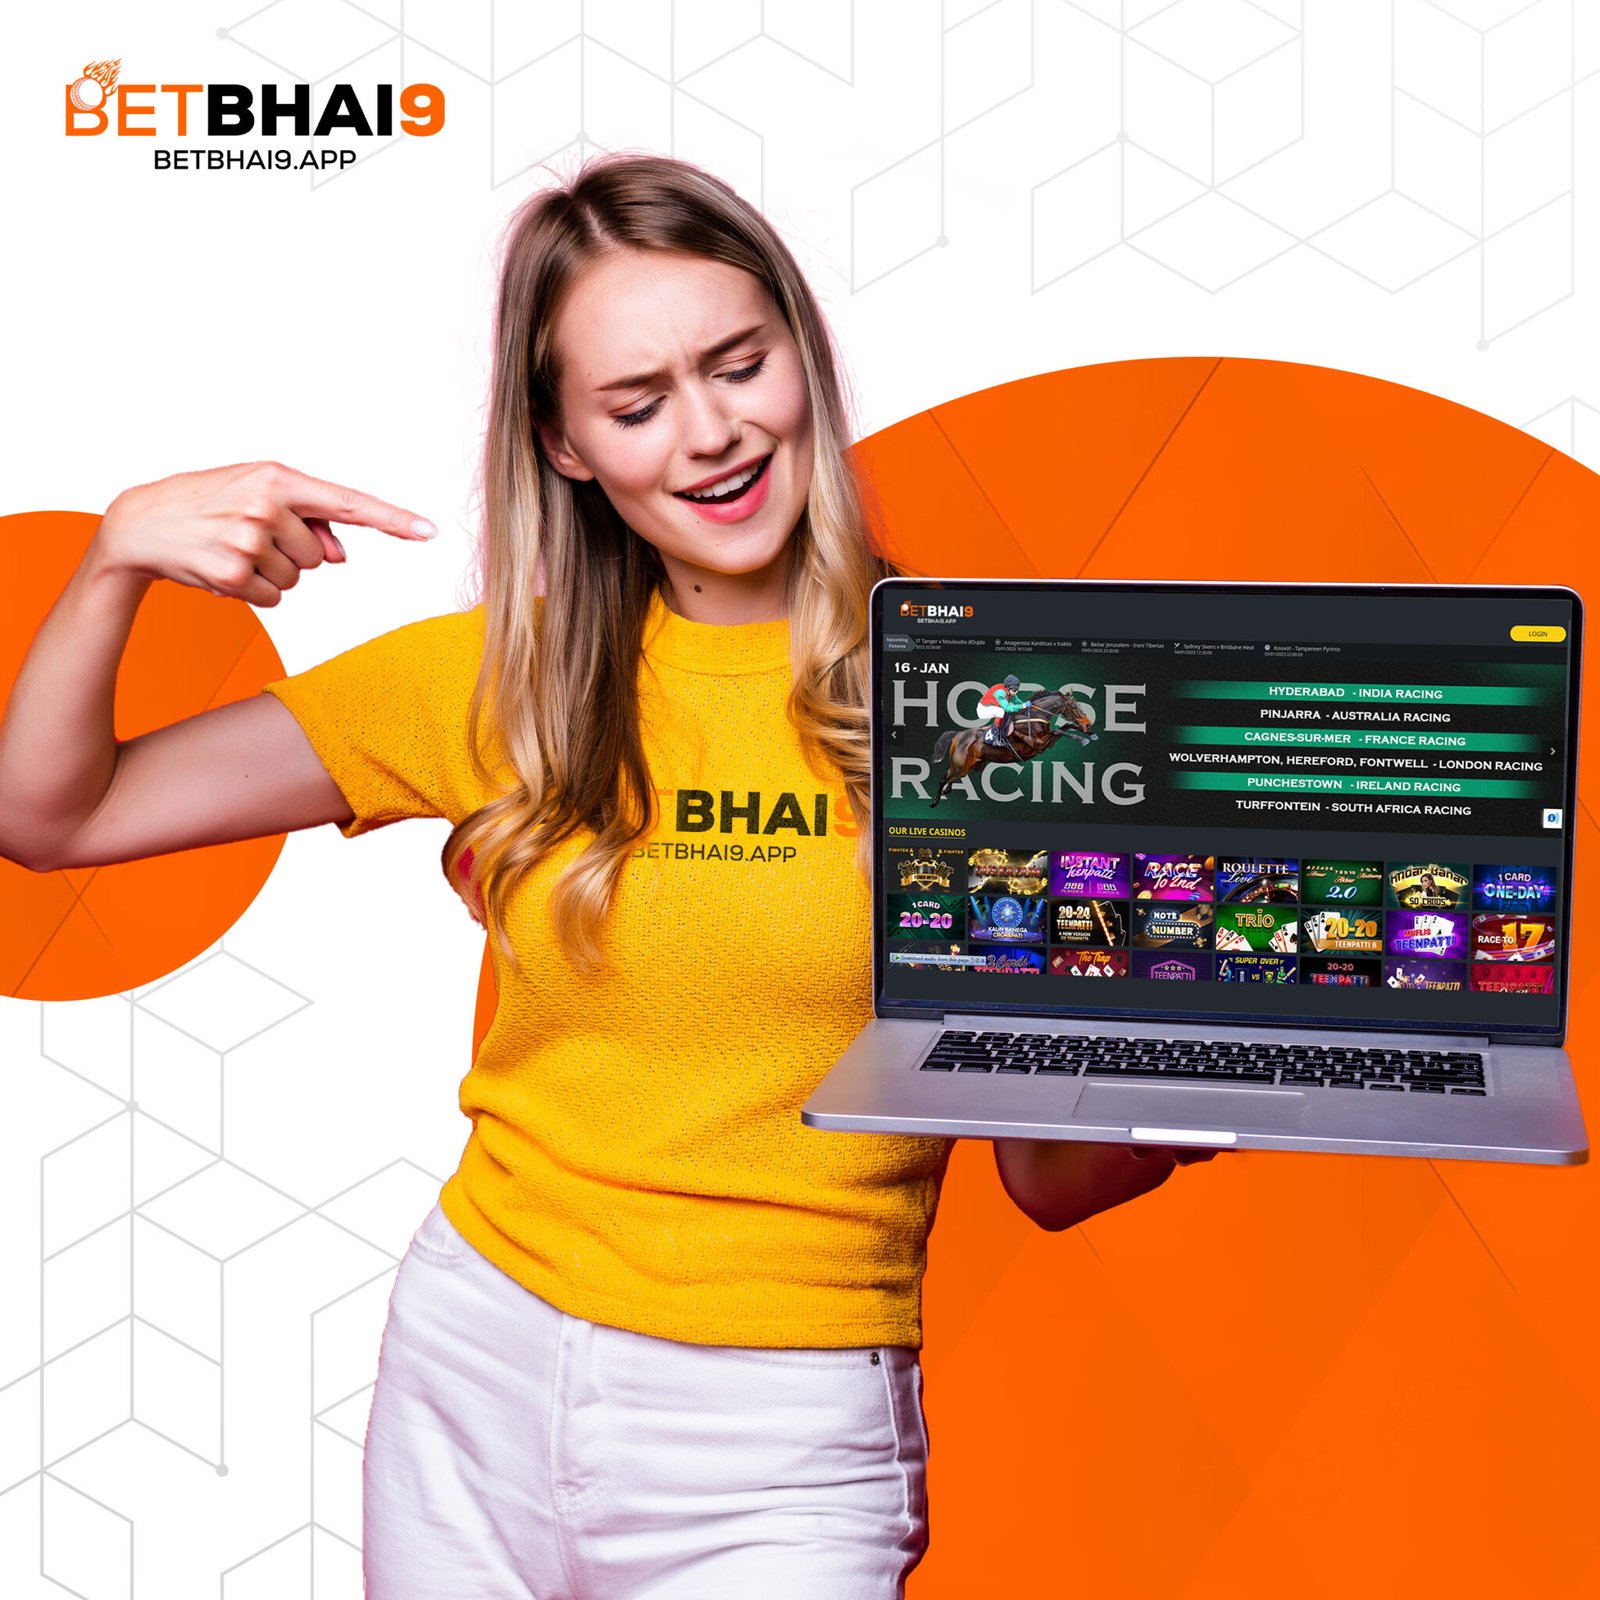 Betbhai9, Betbhai247 Finest and Finest On the internet Cricket Gaming ID Business betbhai9 com within the Asia, Finest Cricket Gaming Internet sites, Sports betting ID WhatsApp number